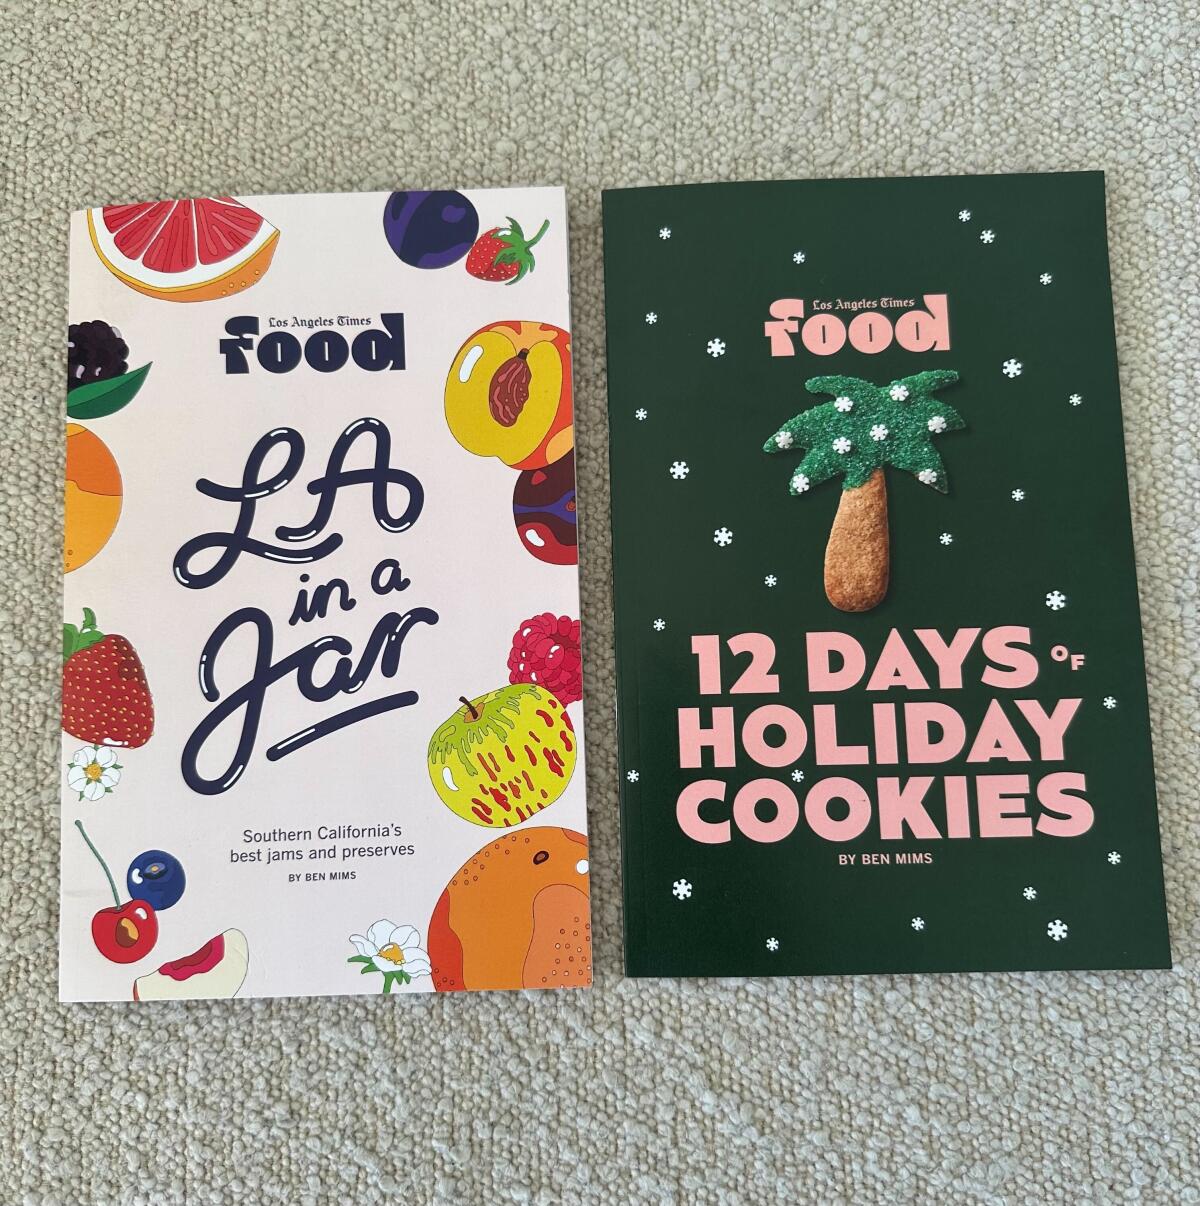 L.A. Times Food cooking zines "L.A. in a Jar" and "12 Days of Holiday Cookies."